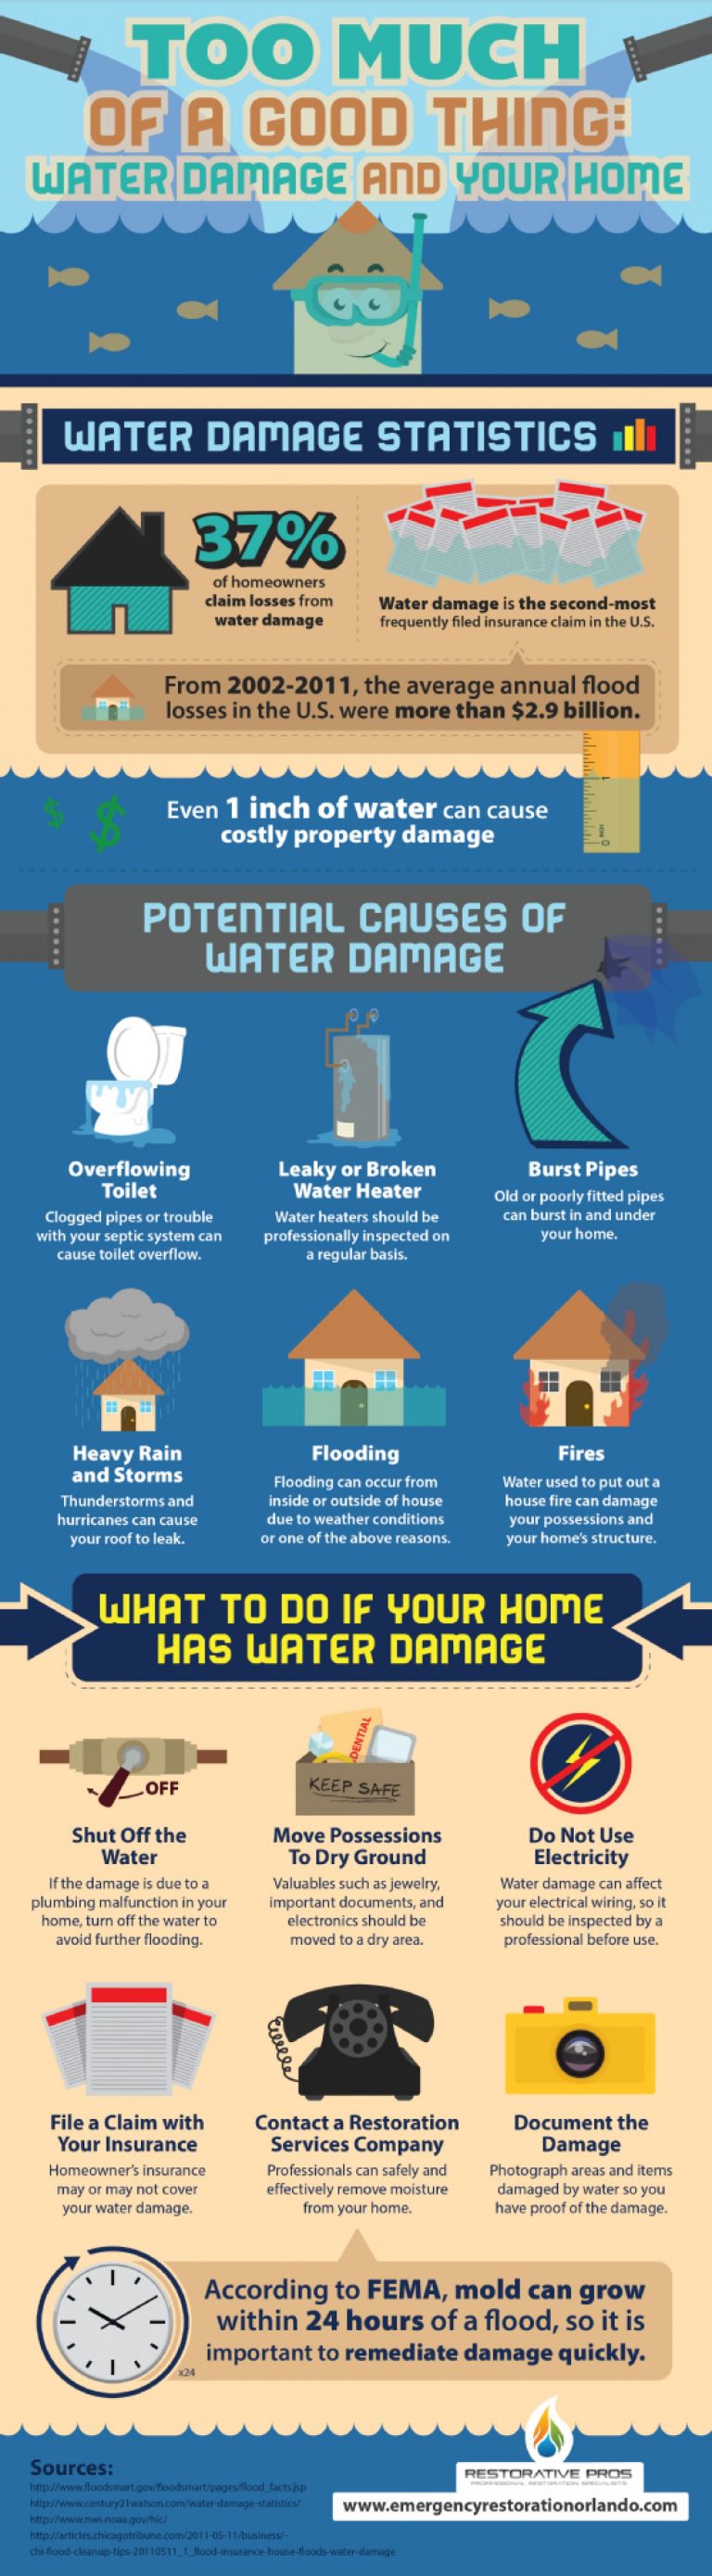 When Water Damage Threatens Your Home, You Need to Act Fast [Infographic]